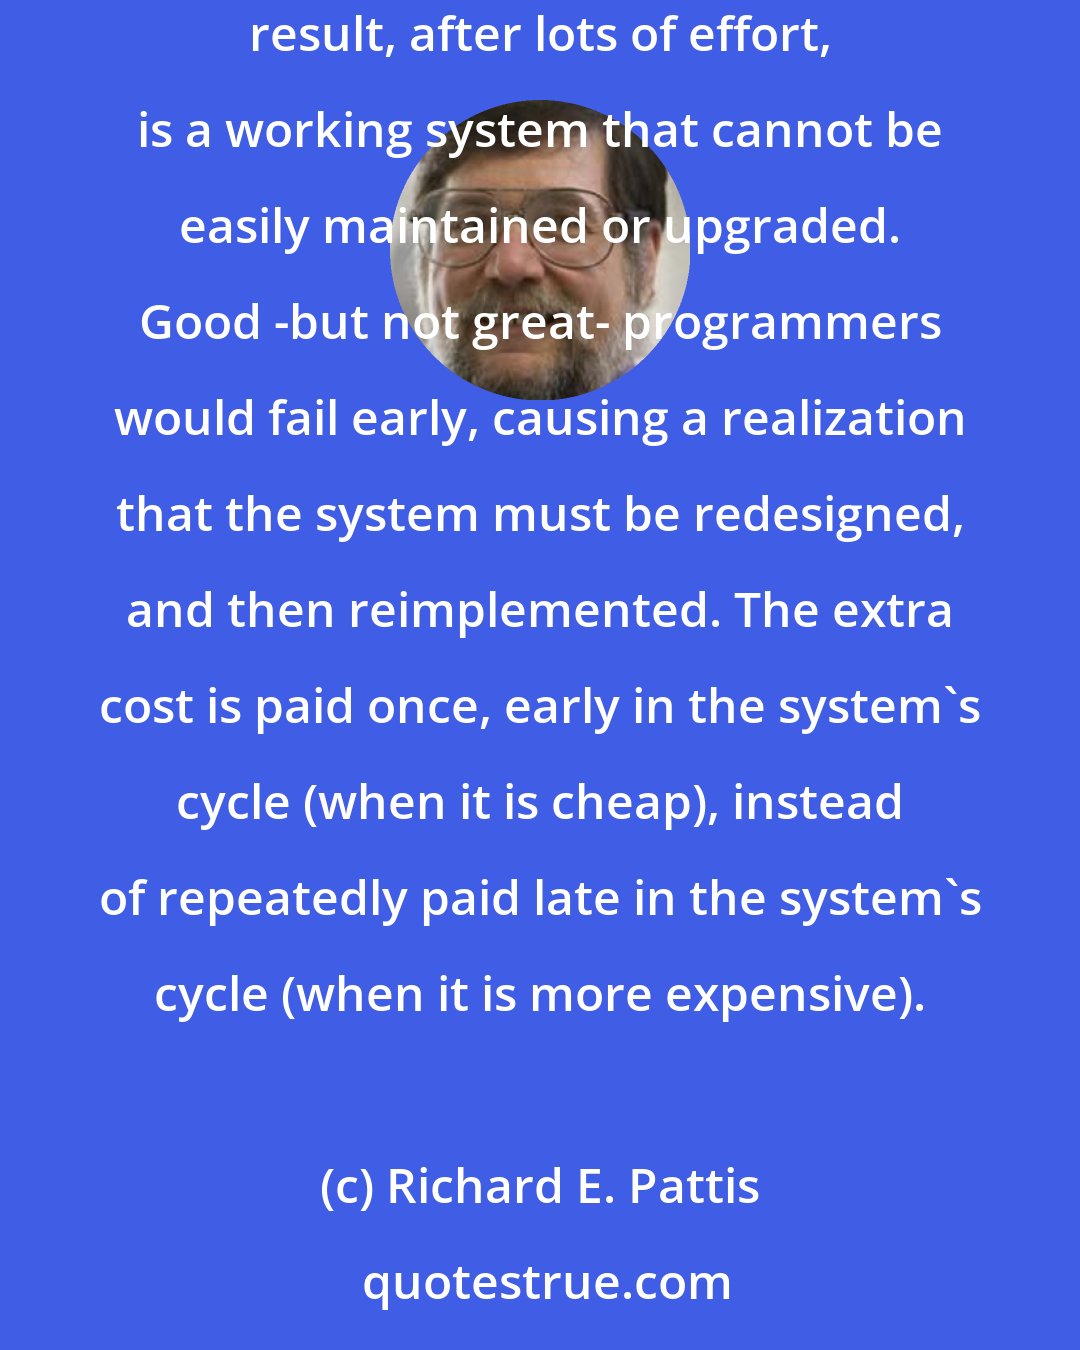 Richard E. Pattis: When building a complex system, having crackerjack programmers (who can make any design work, even a bad one) can be a liability. The result, after lots of effort, is a working system that cannot be easily maintained or upgraded. Good -but not great- programmers would fail early, causing a realization that the system must be redesigned, and then reimplemented. The extra cost is paid once, early in the system's cycle (when it is cheap), instead of repeatedly paid late in the system's cycle (when it is more expensive).